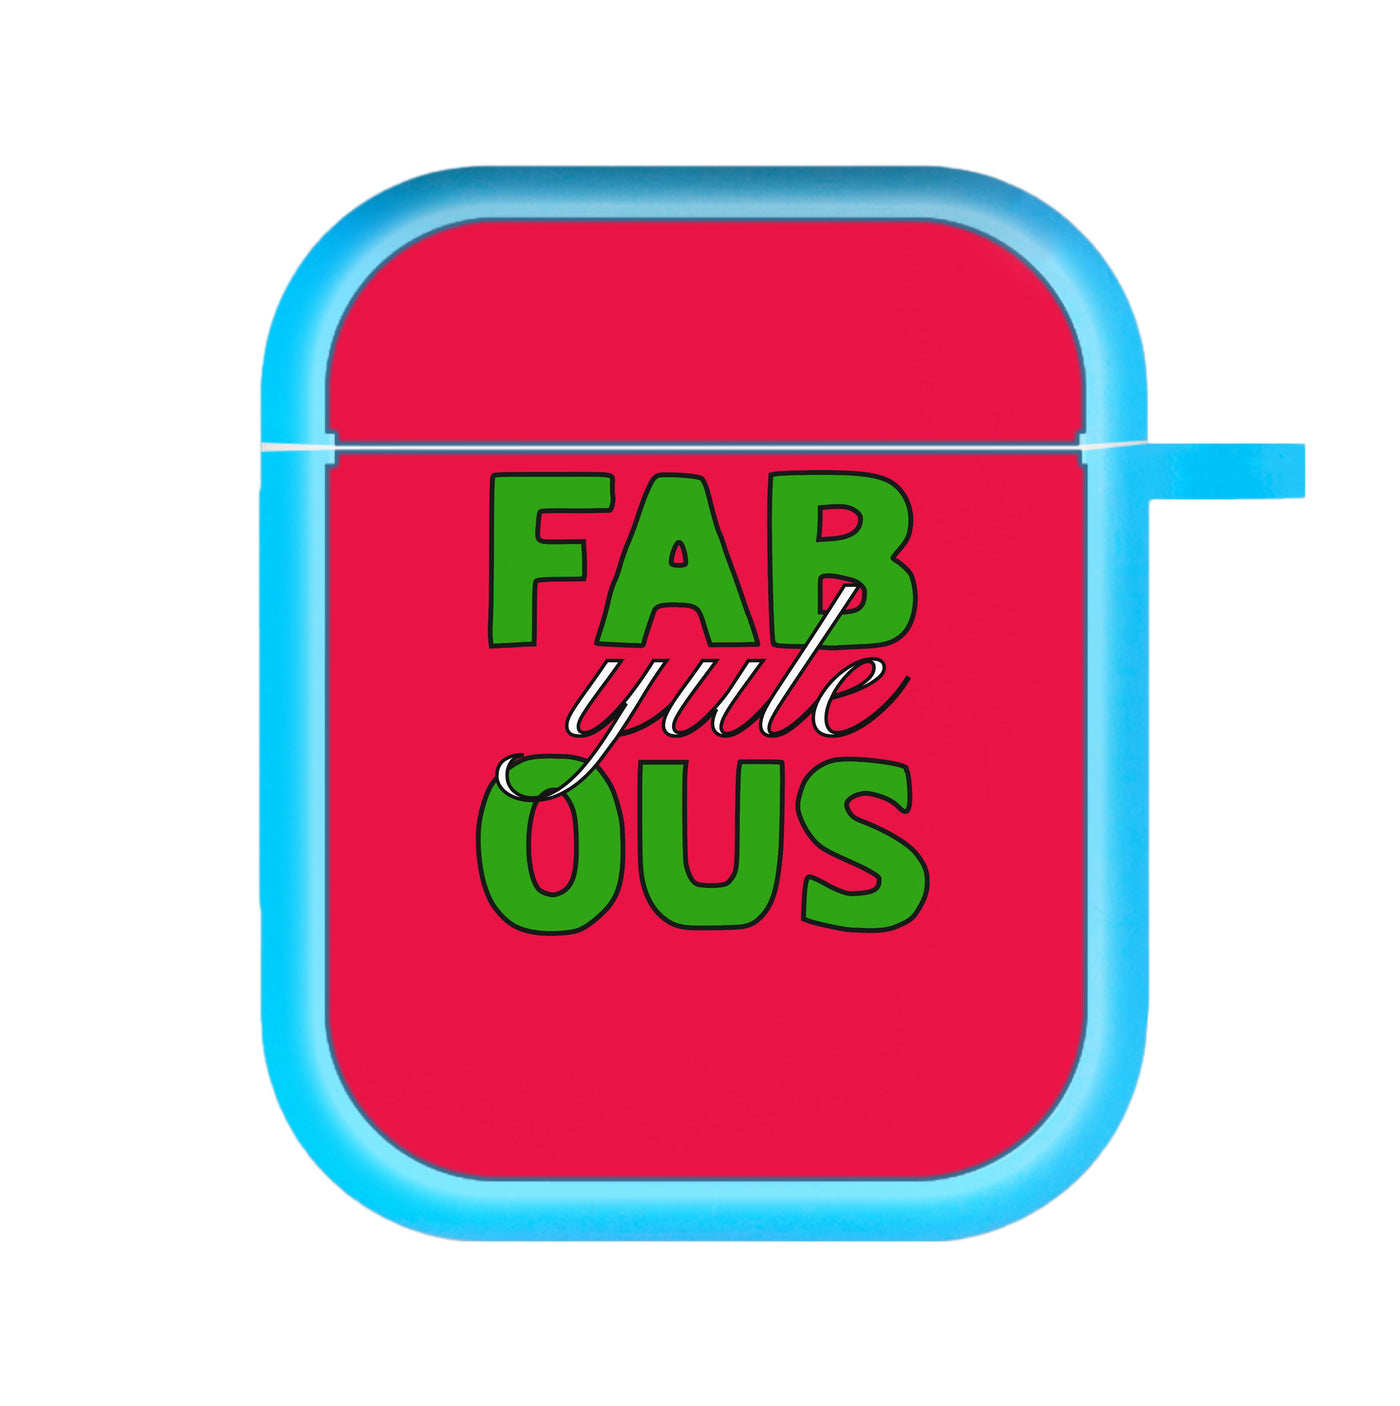 Fab-Yule-Ous Red - Christmas Puns AirPods Case